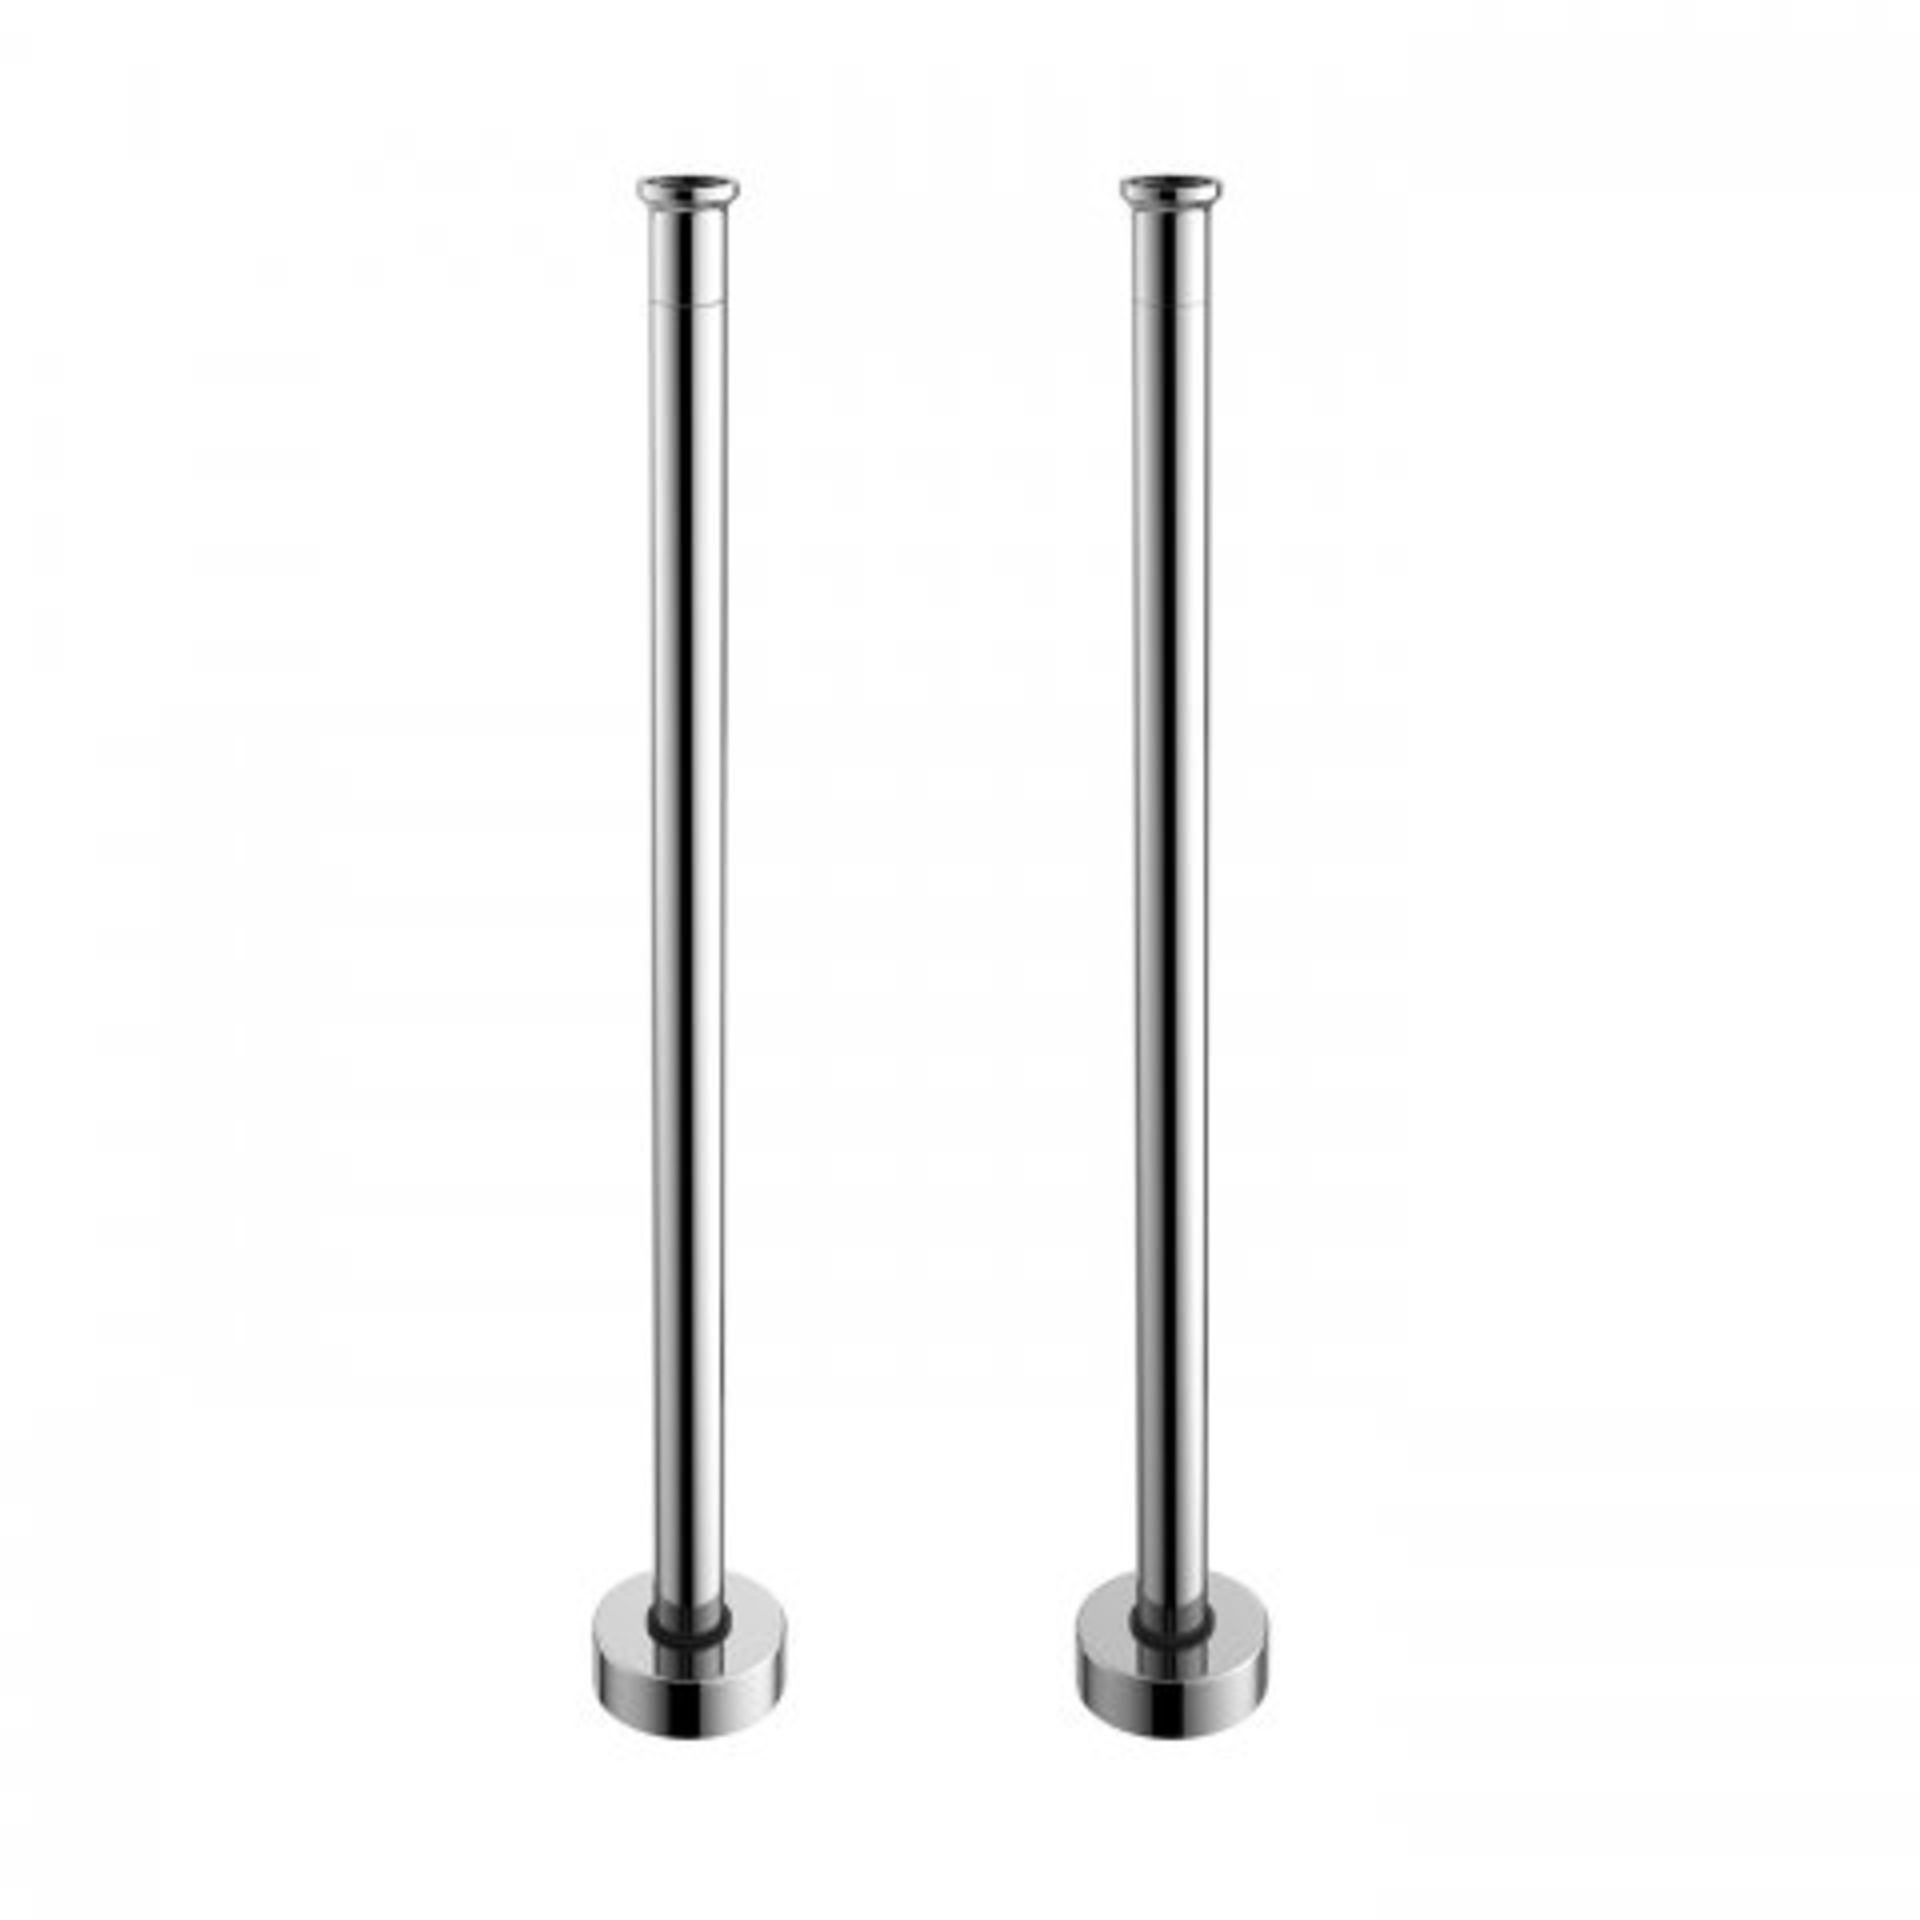 (I73) Two Standpipes for Freestanding Bath Taps RRP £94.99 These two standpipes are designed for use